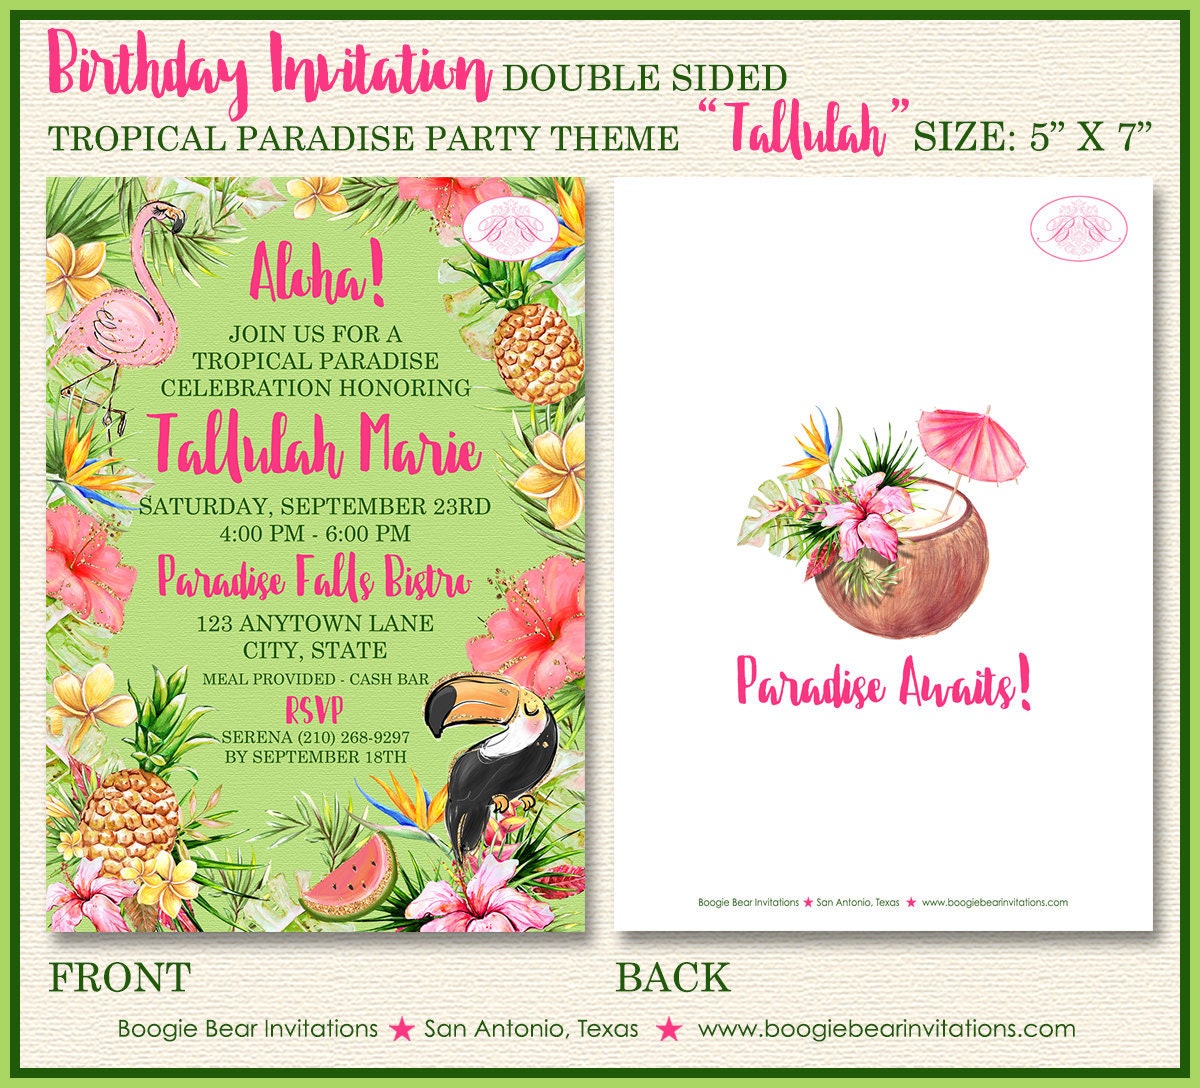 Tropical Paradise Birthday Party Invitation Pink Gold Green Jungle Wild Boogie Bear Invitations Tallulah Theme Paperless Printable Printed